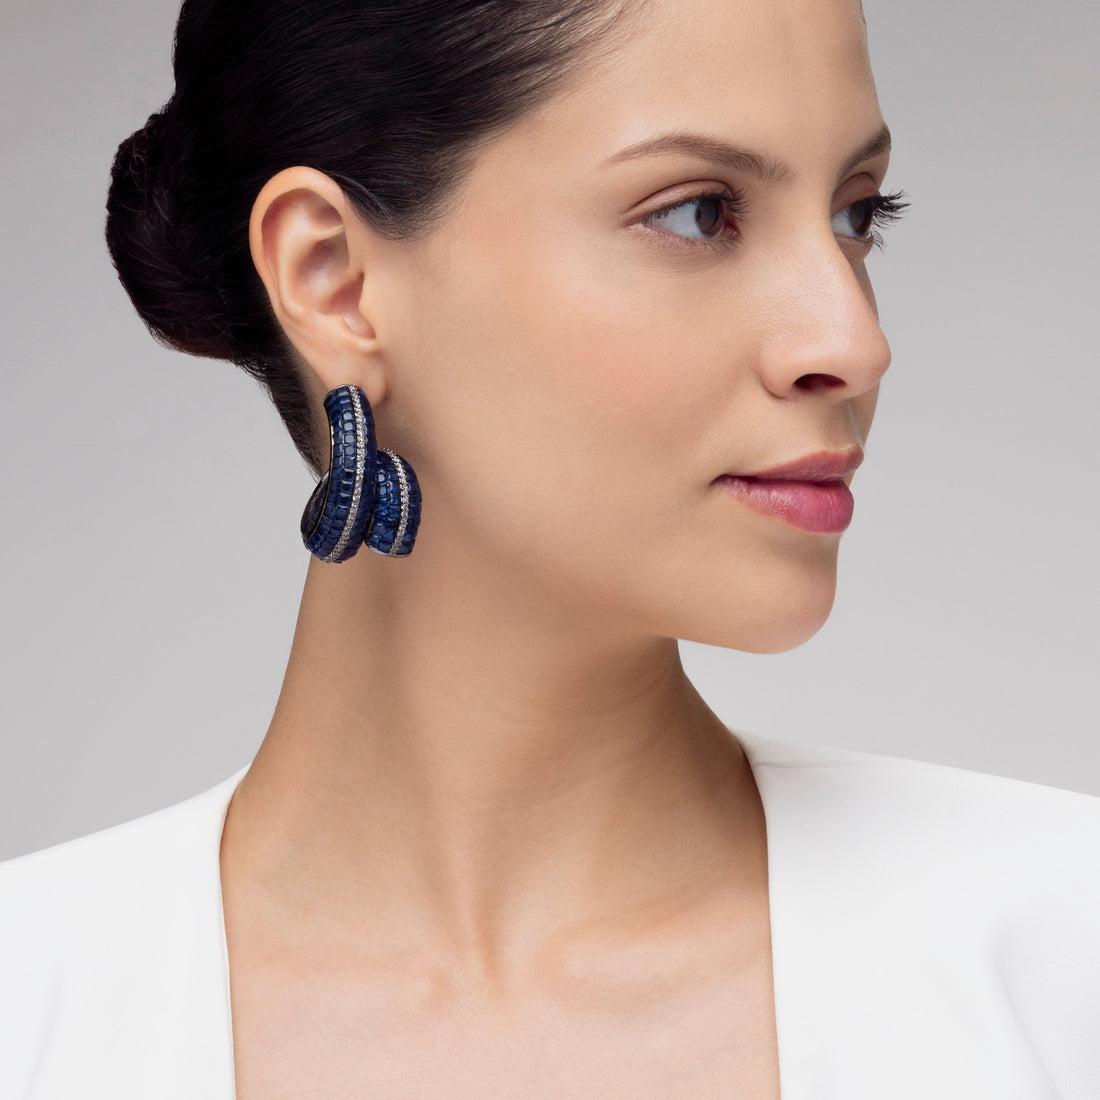 Spiral Fusion Earrings By PRAO